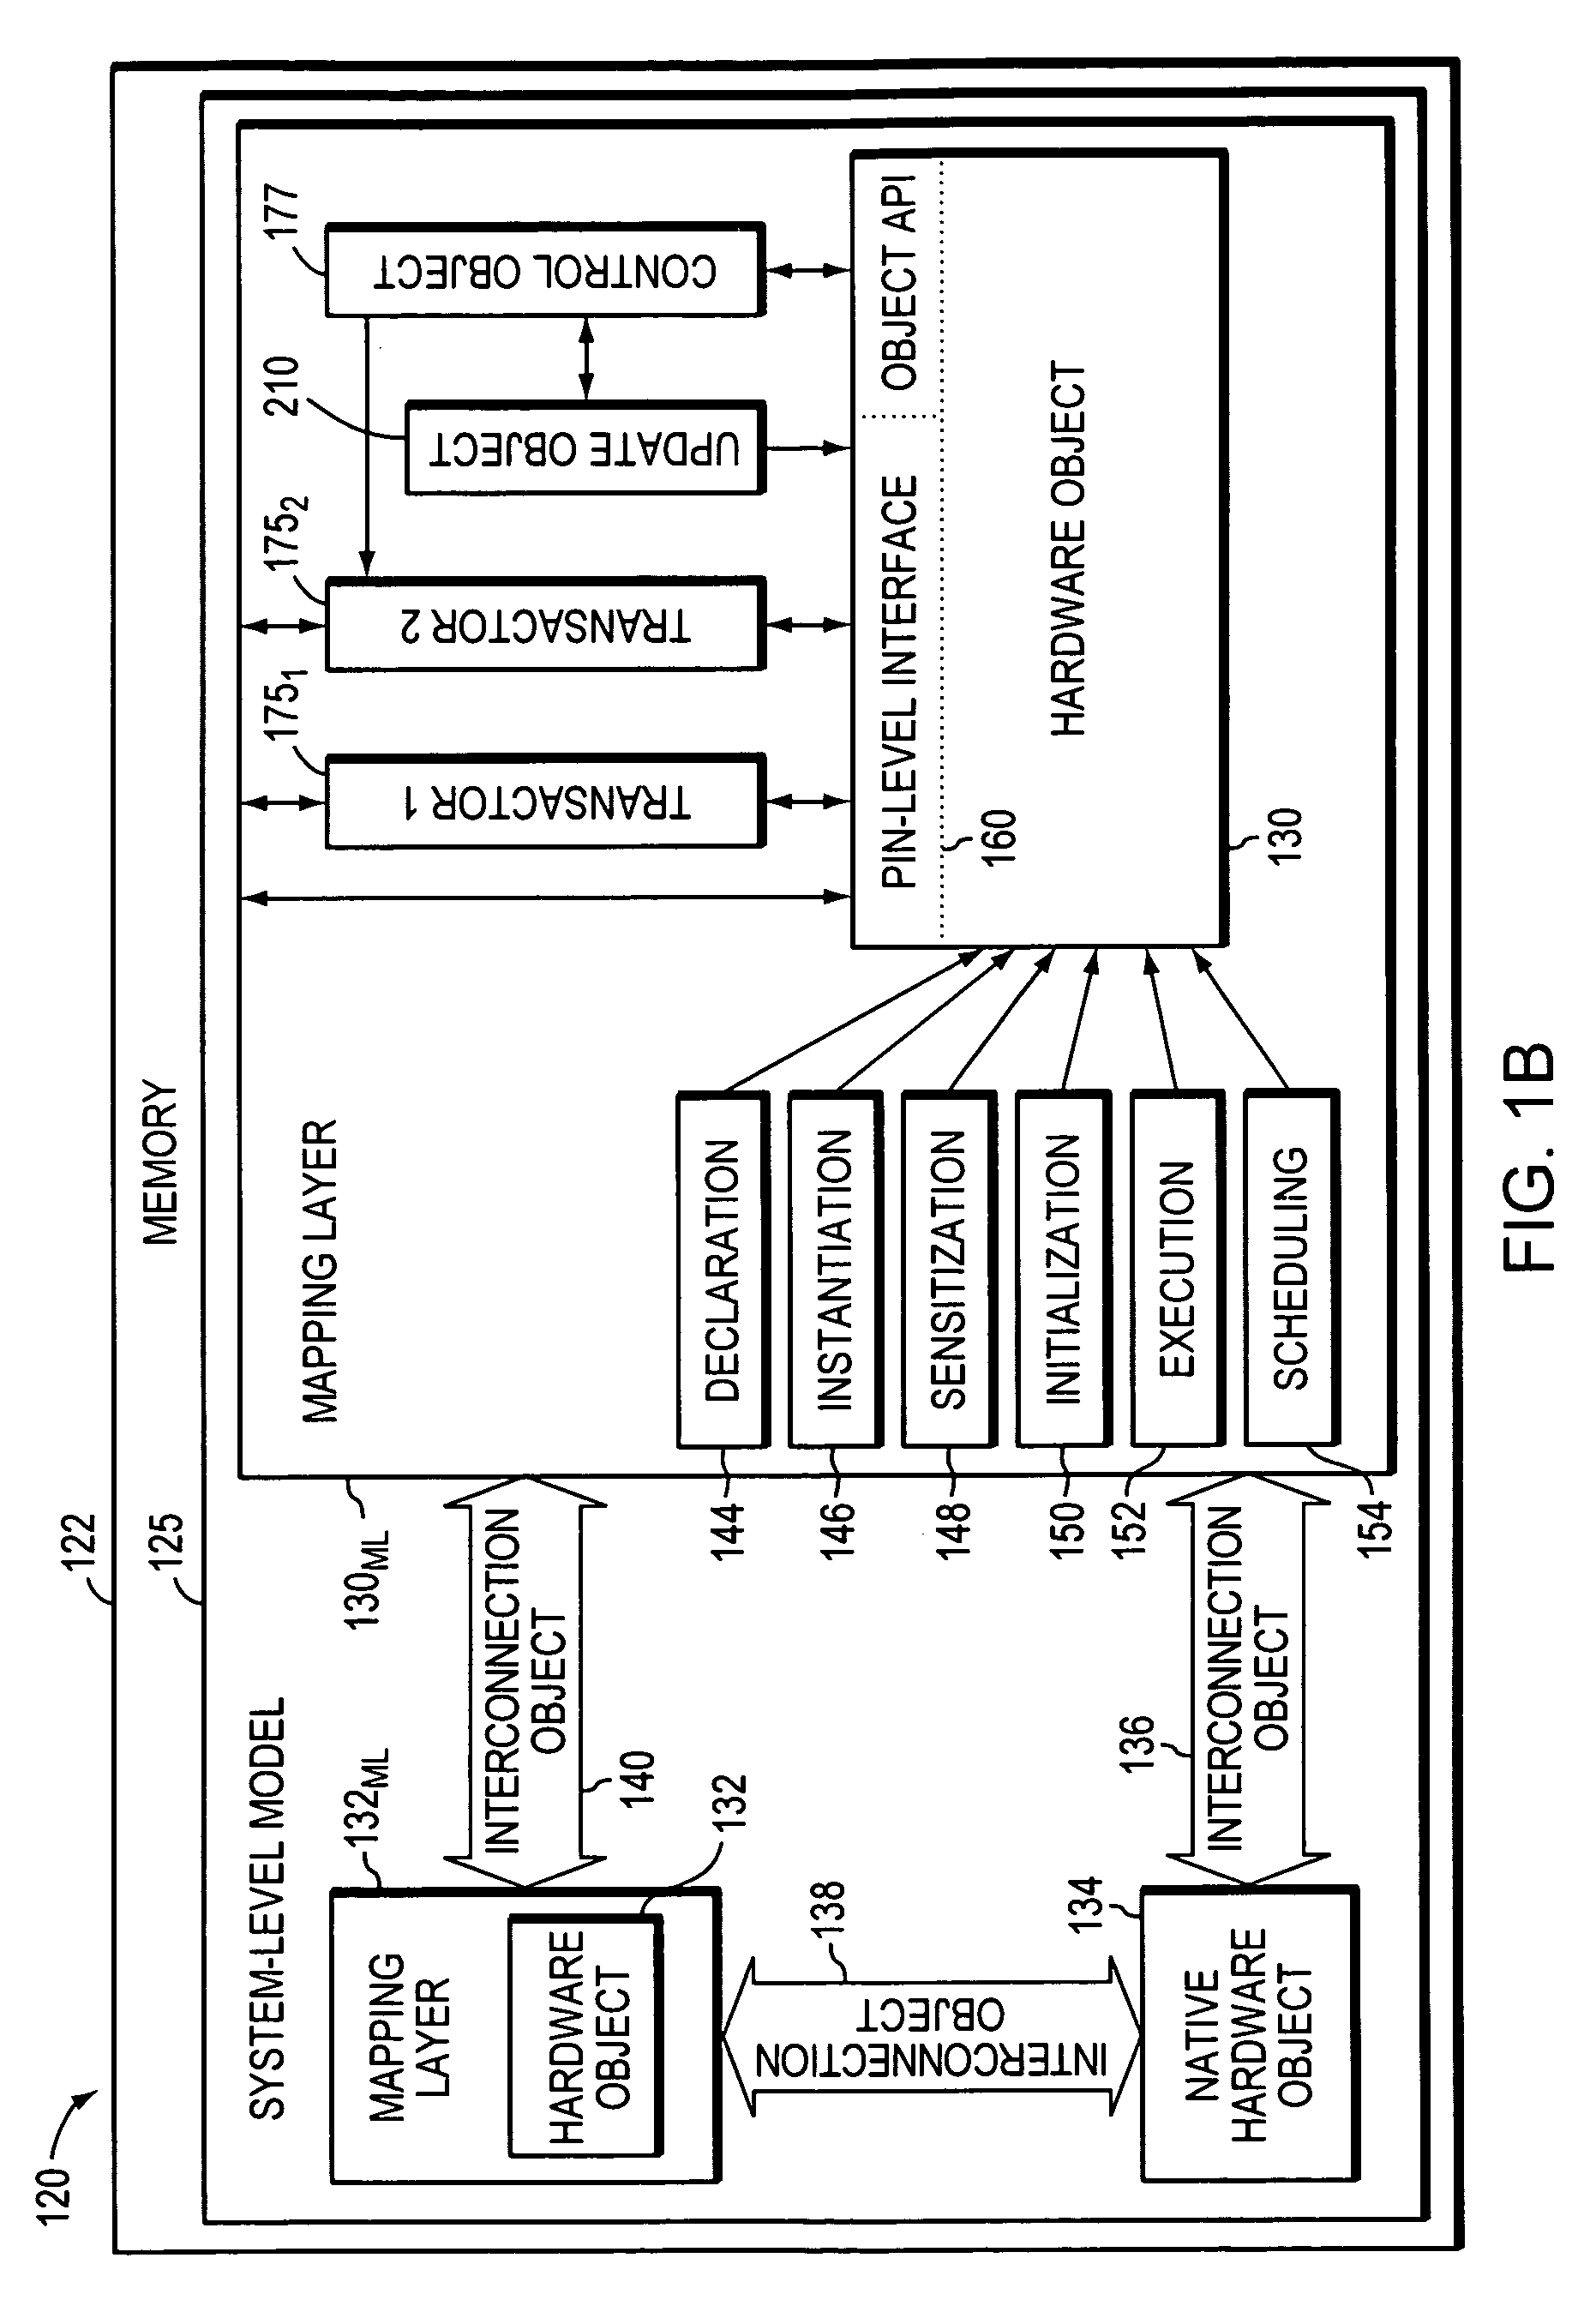 System-level simulation of devices having diverse timing